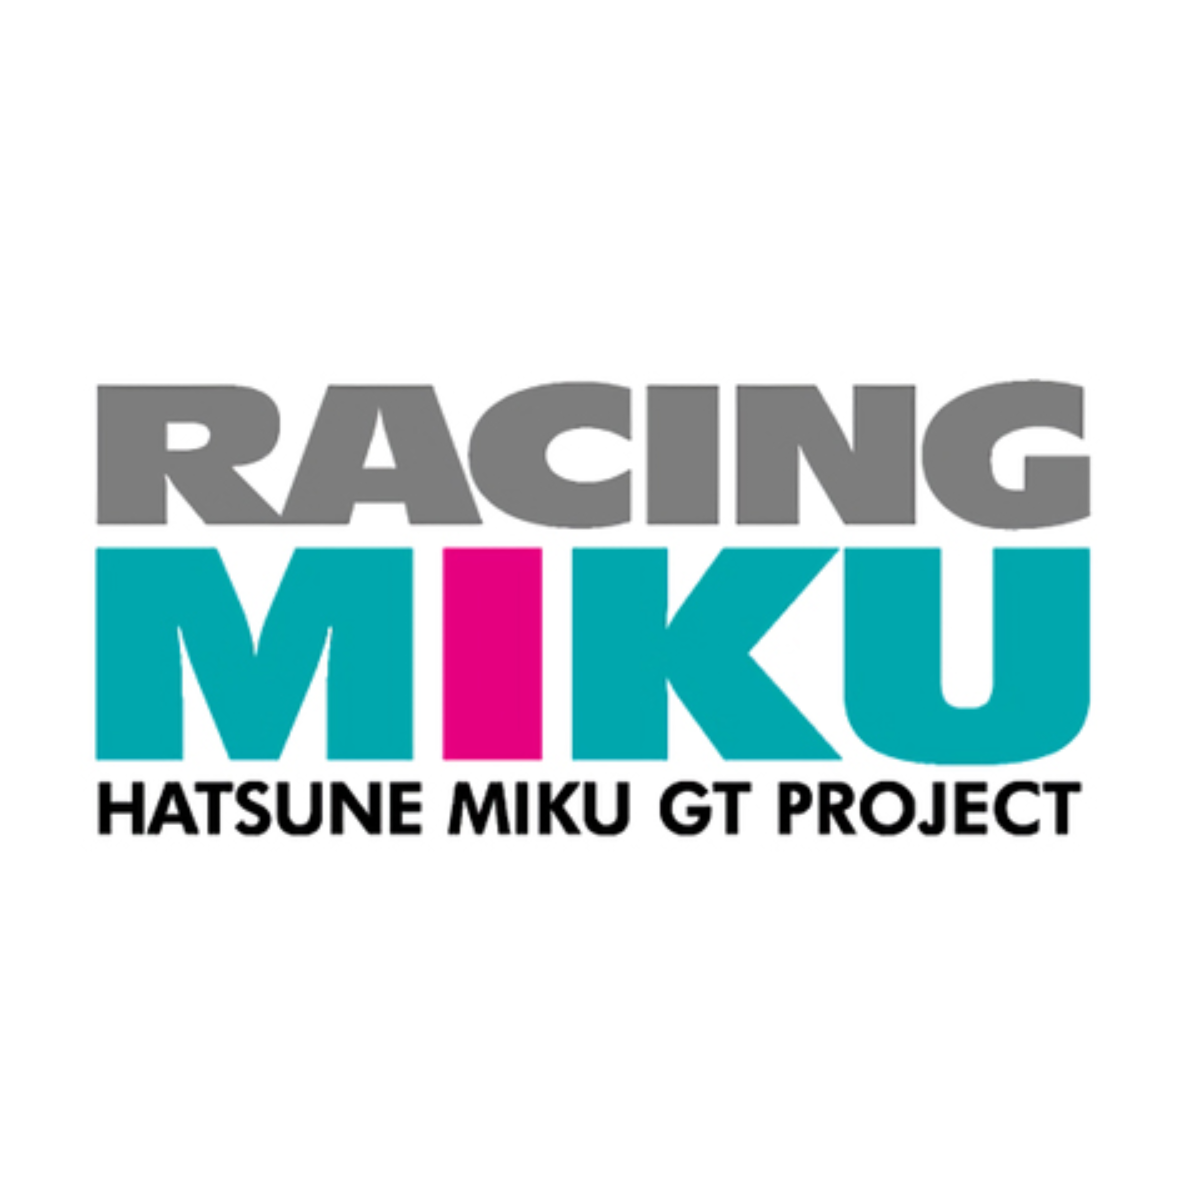 Bushiroad Sleeve Collection - Racing Miku 2023 Ver. &quot;Support Illustration Round 1 Okayama&quot; (Vol.4014)-Bushiroad-Ace Cards &amp; Collectibles